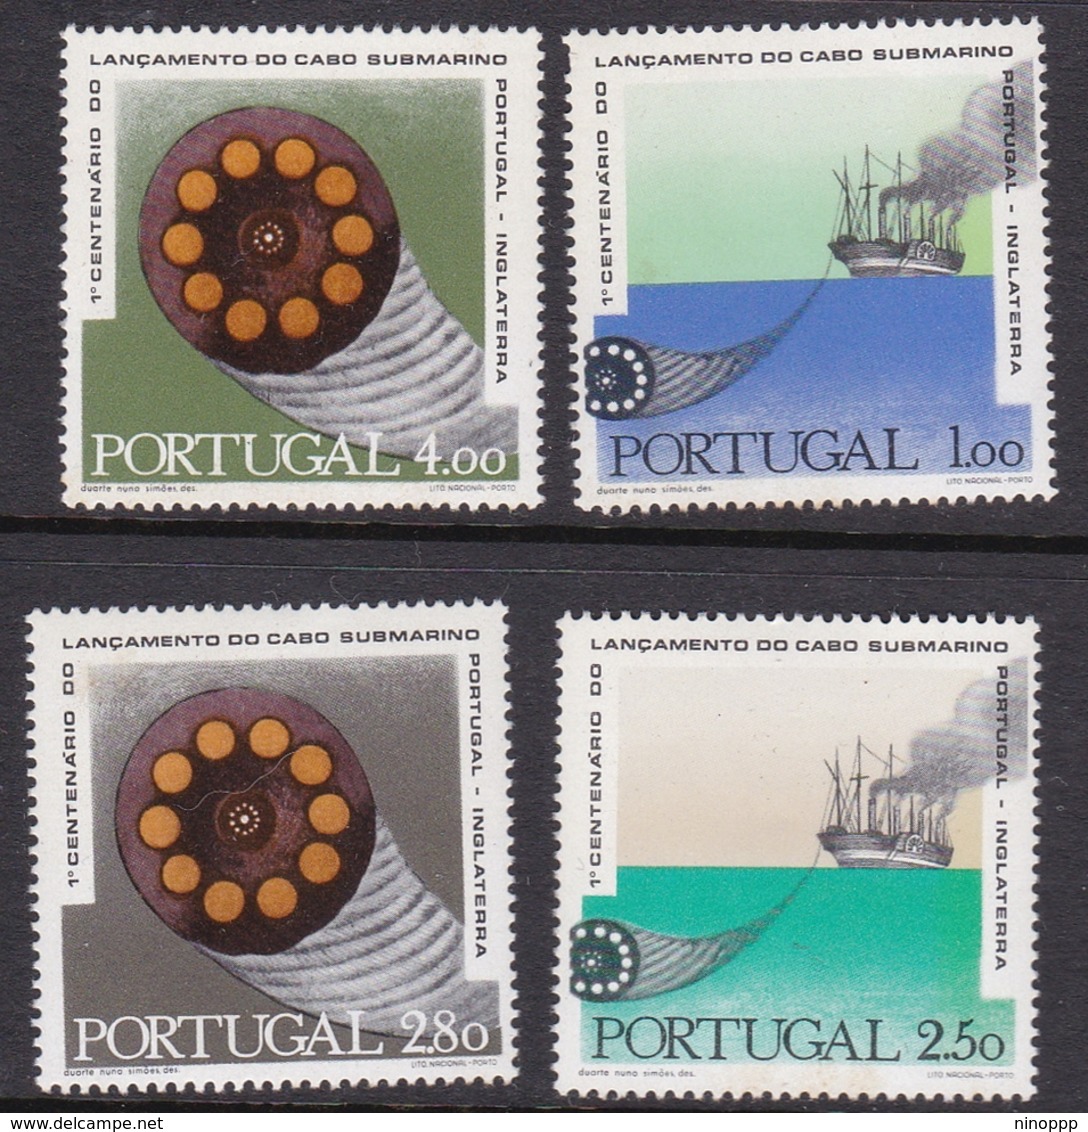 Portugal SG 1399-1402 1970 Centenary Of Submarine Cable, Mint Never Hinged, Light Toning - Unused Stamps